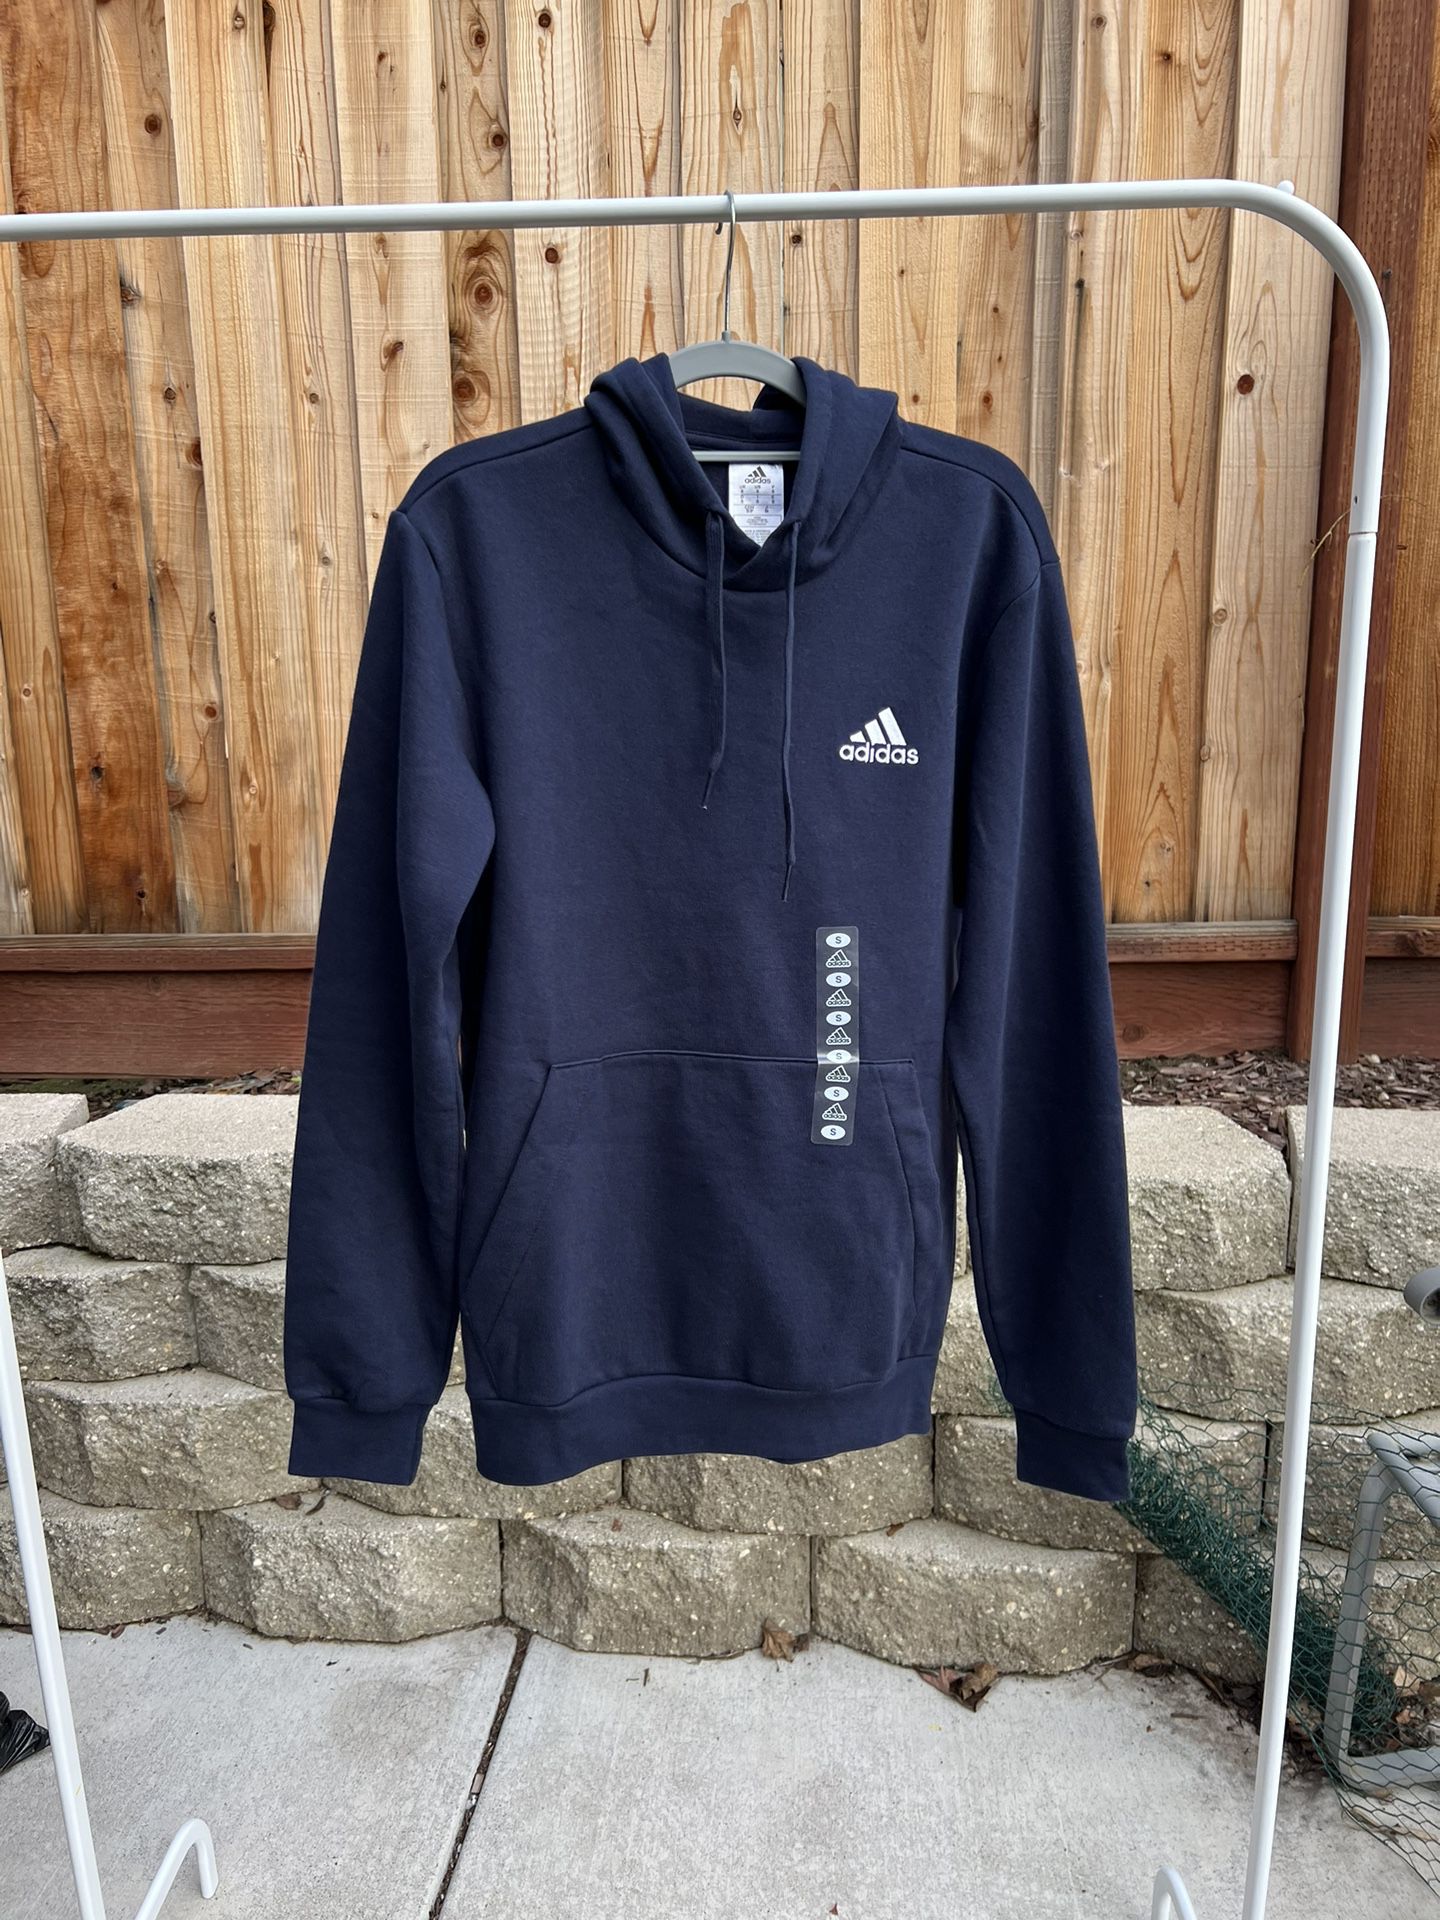 New Mens Small Adidas Pull Over Hoodie